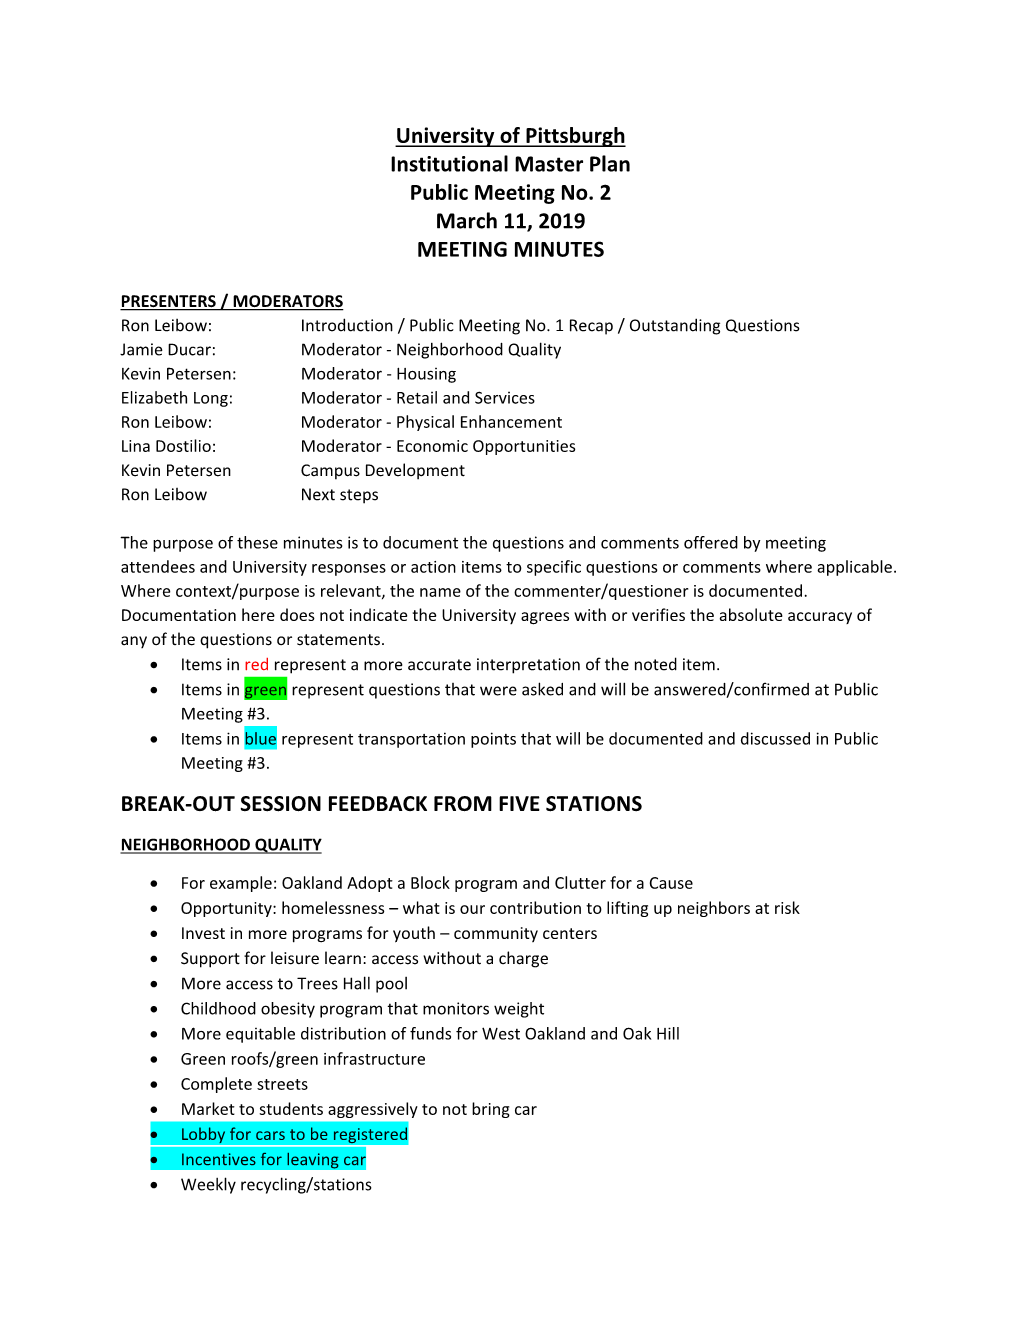 University of Pittsburgh Institutional Master Plan Public Meeting No. 2 March 11, 2019 MEETING MINUTES